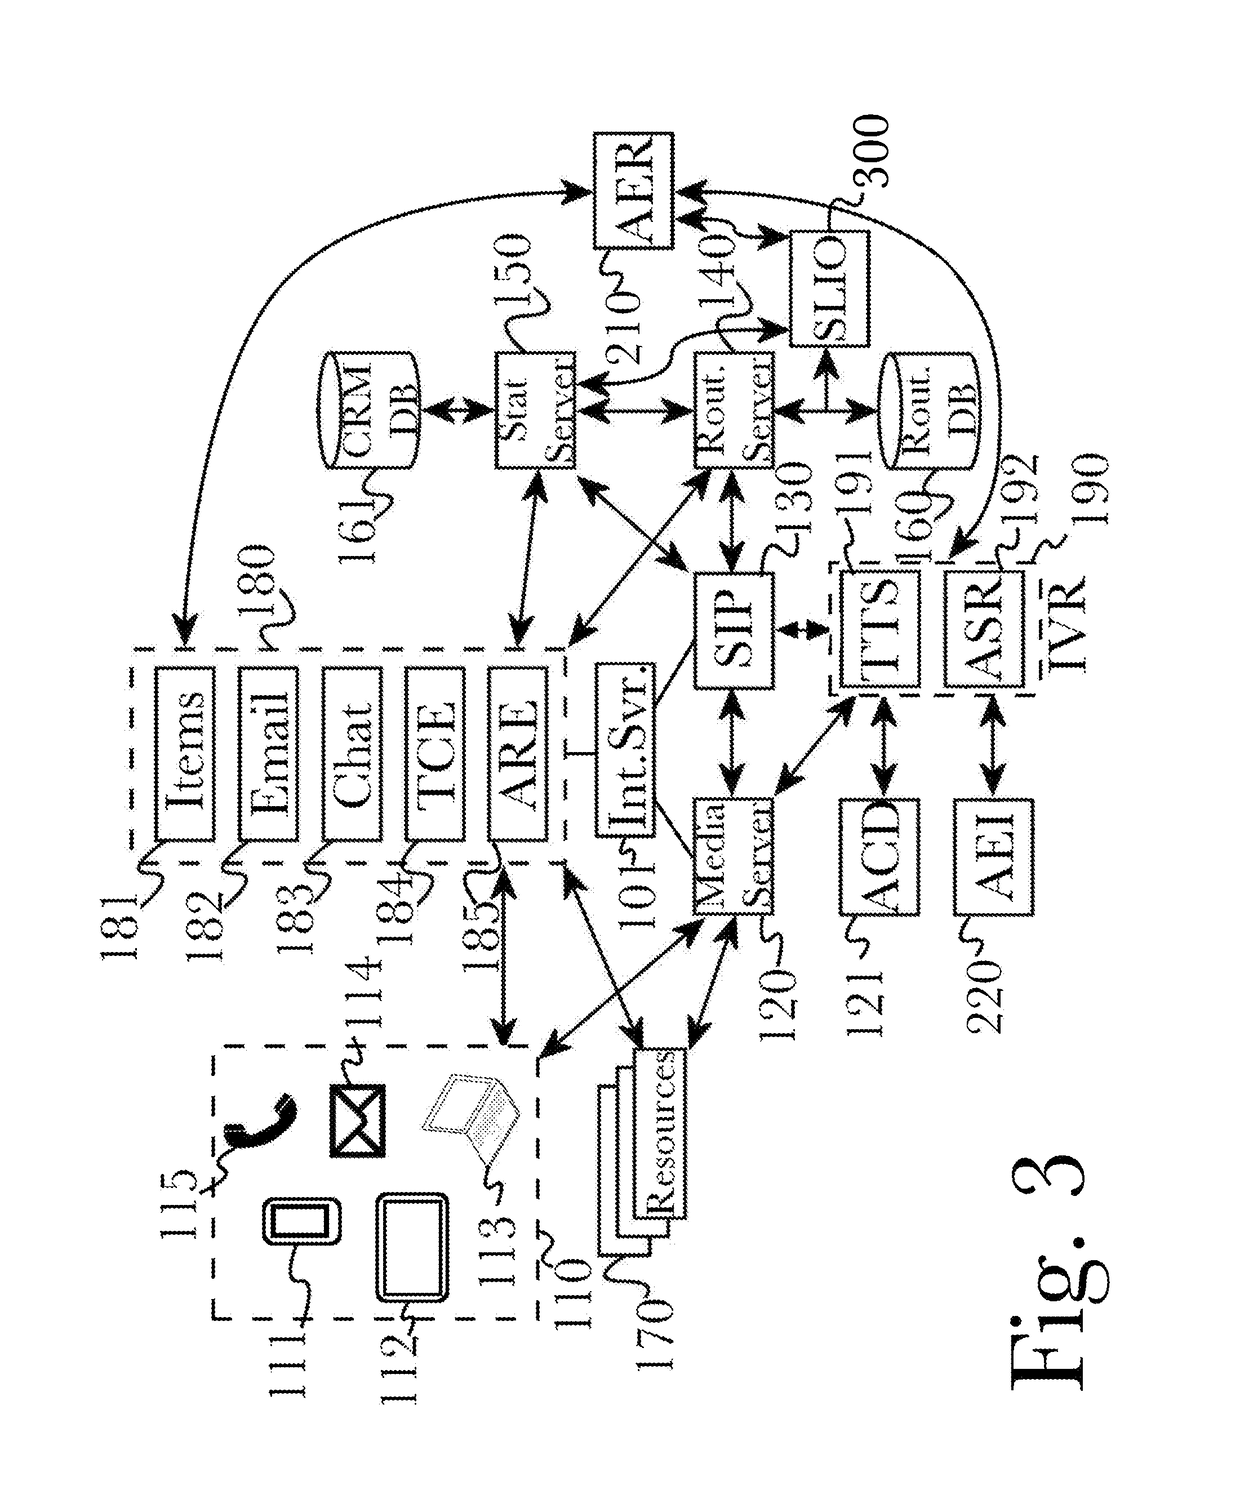 System and methods for using conversational similarity for dimension reduction in deep analytics